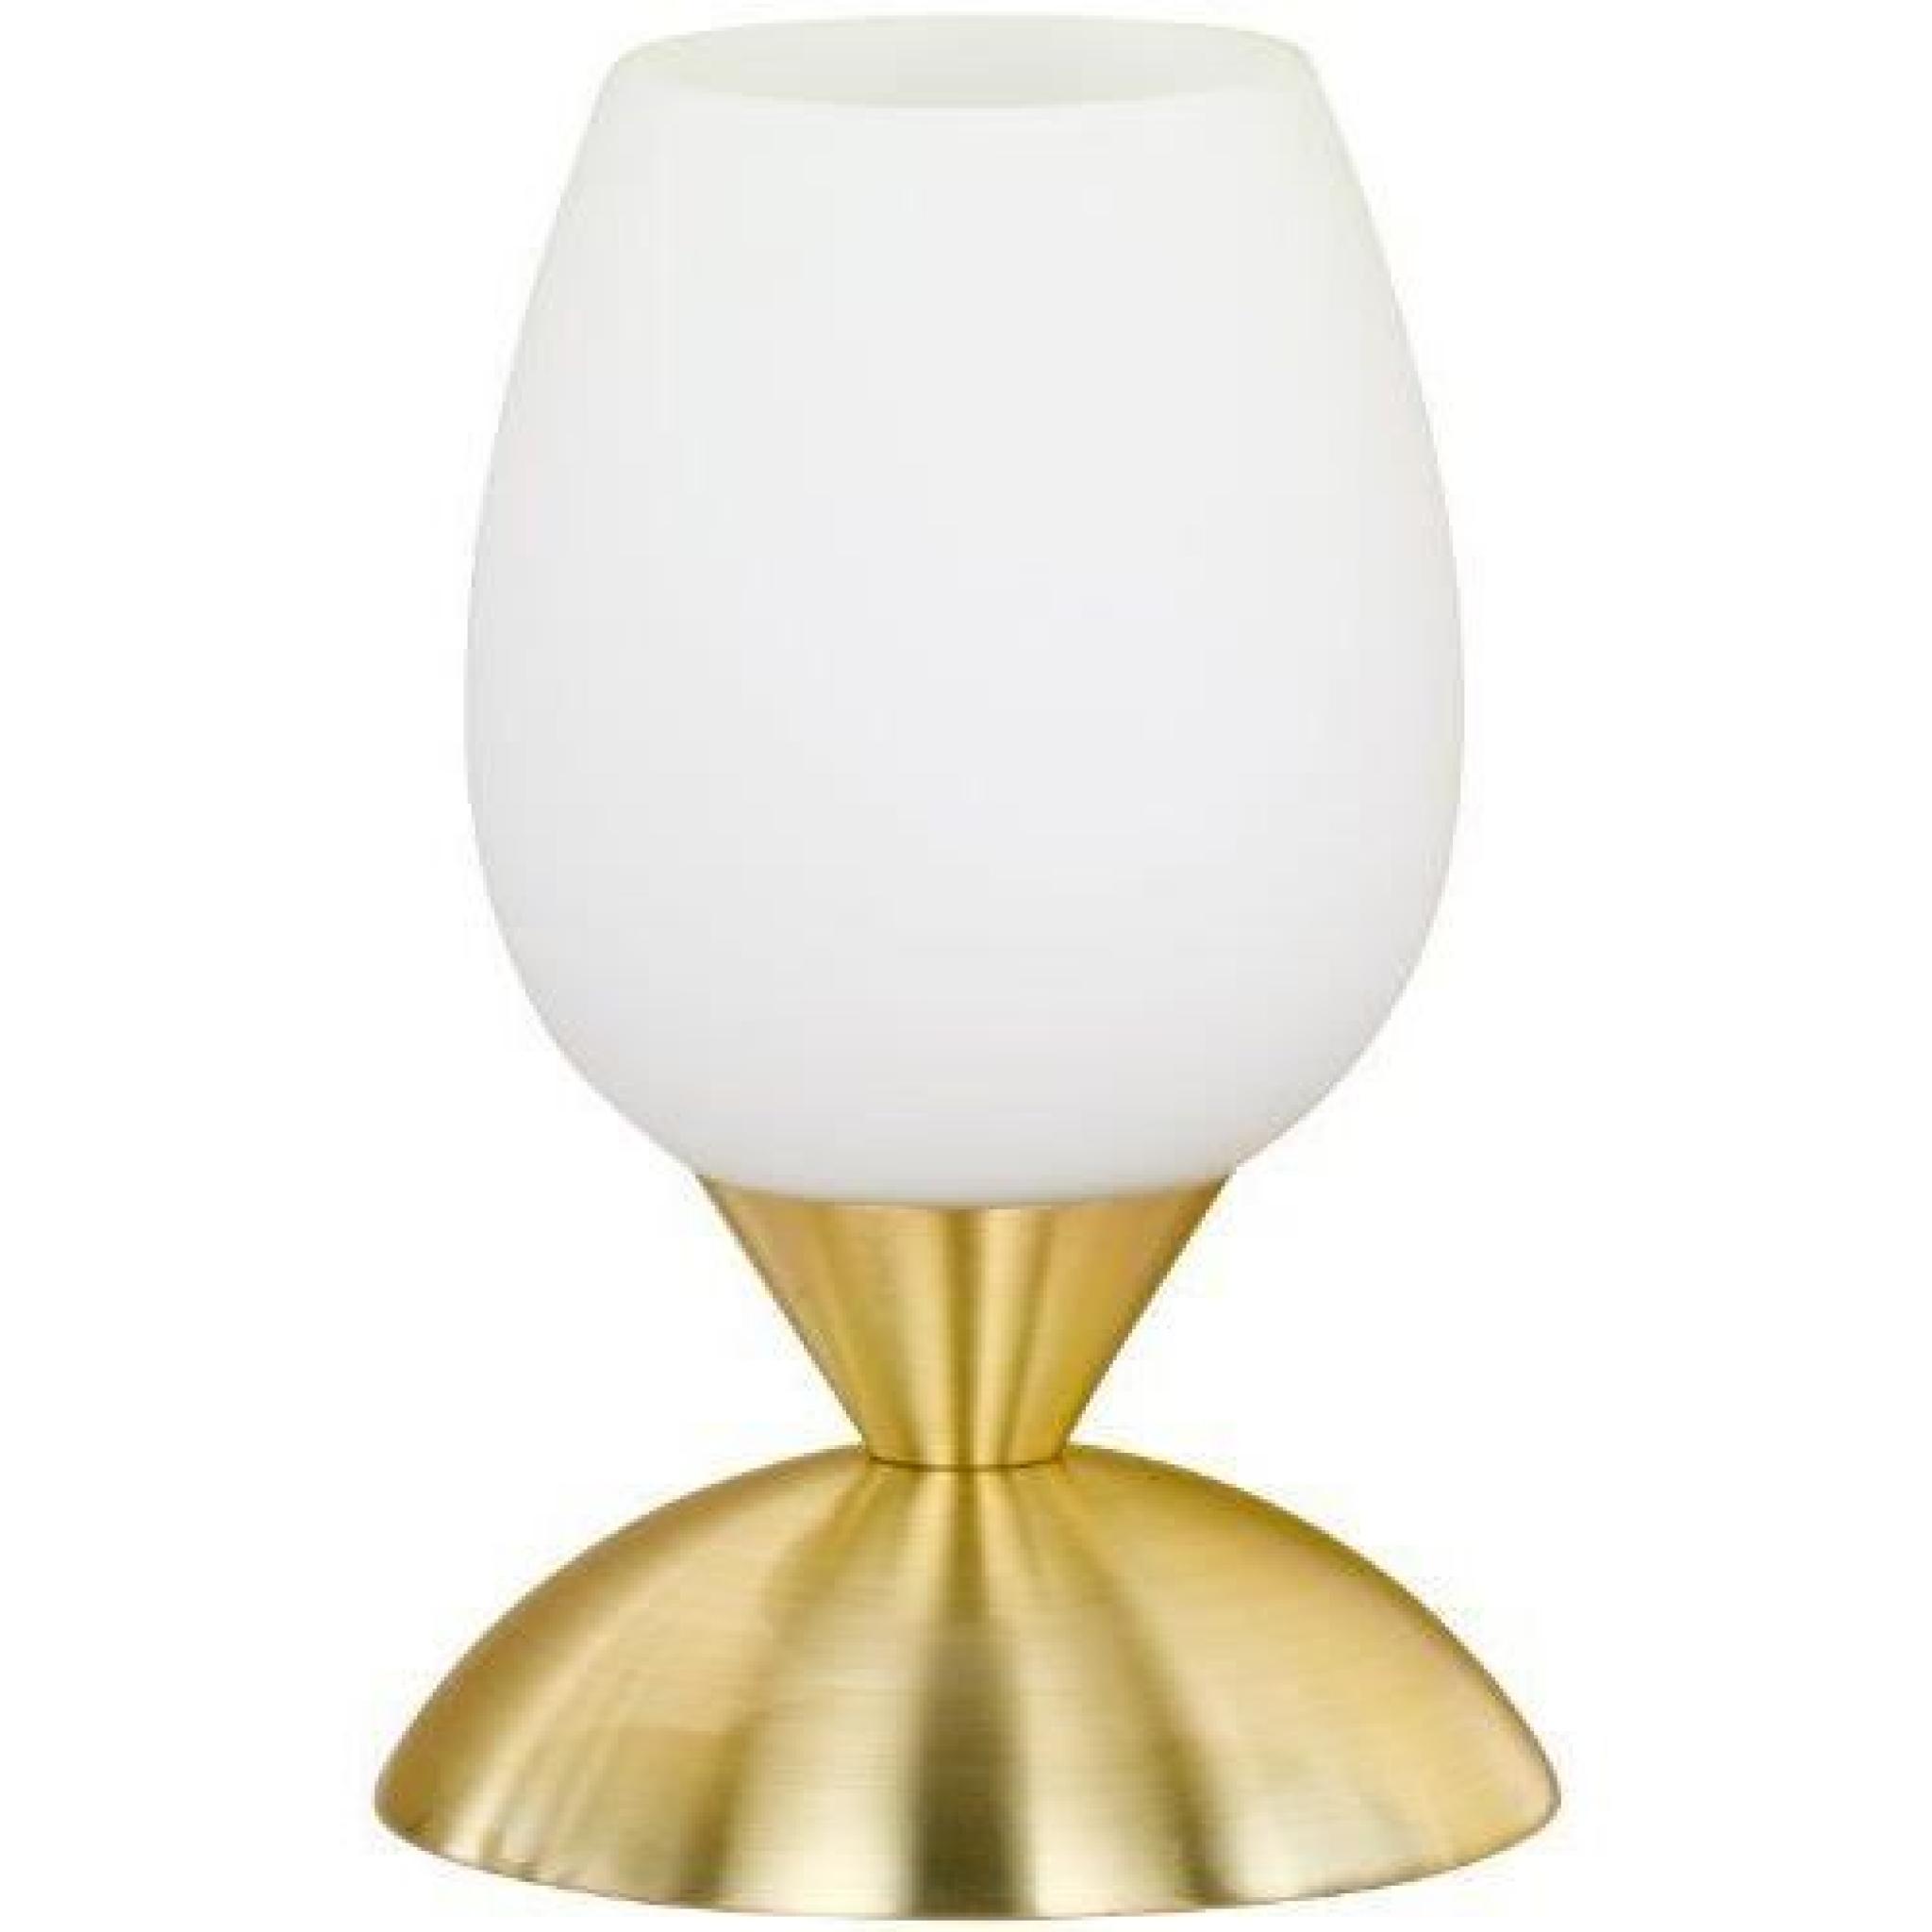 Touch me Lampe CUP Moderne Laiton/blanc mat